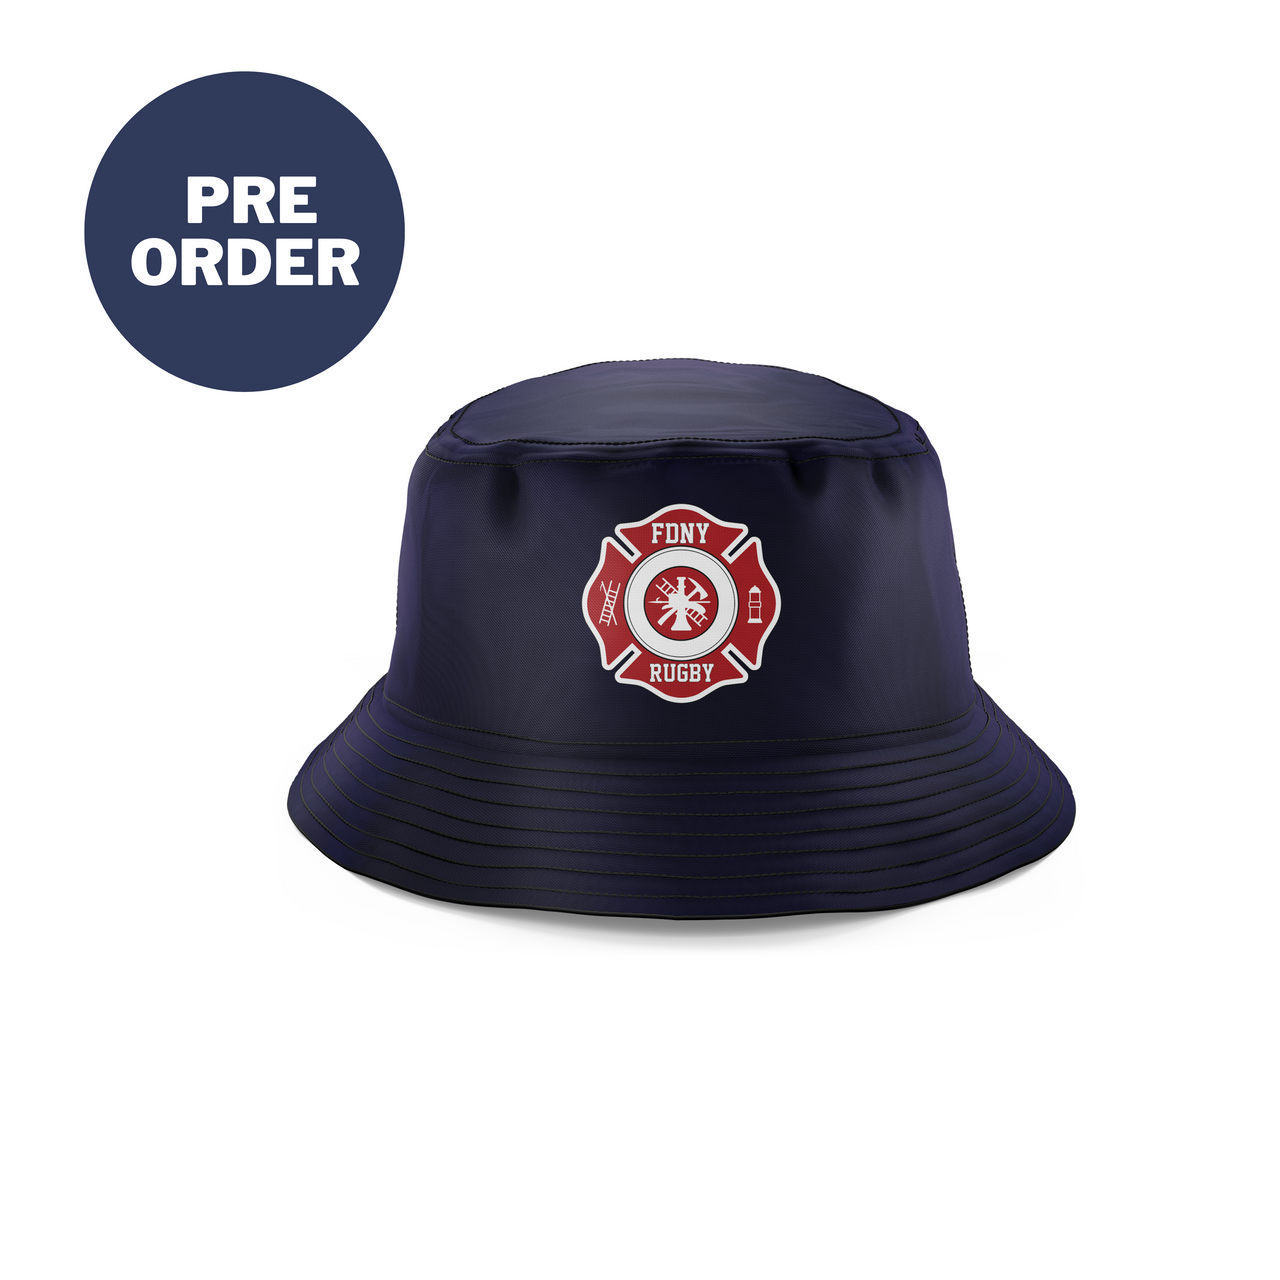 FDNY Rugby Bucket Hat